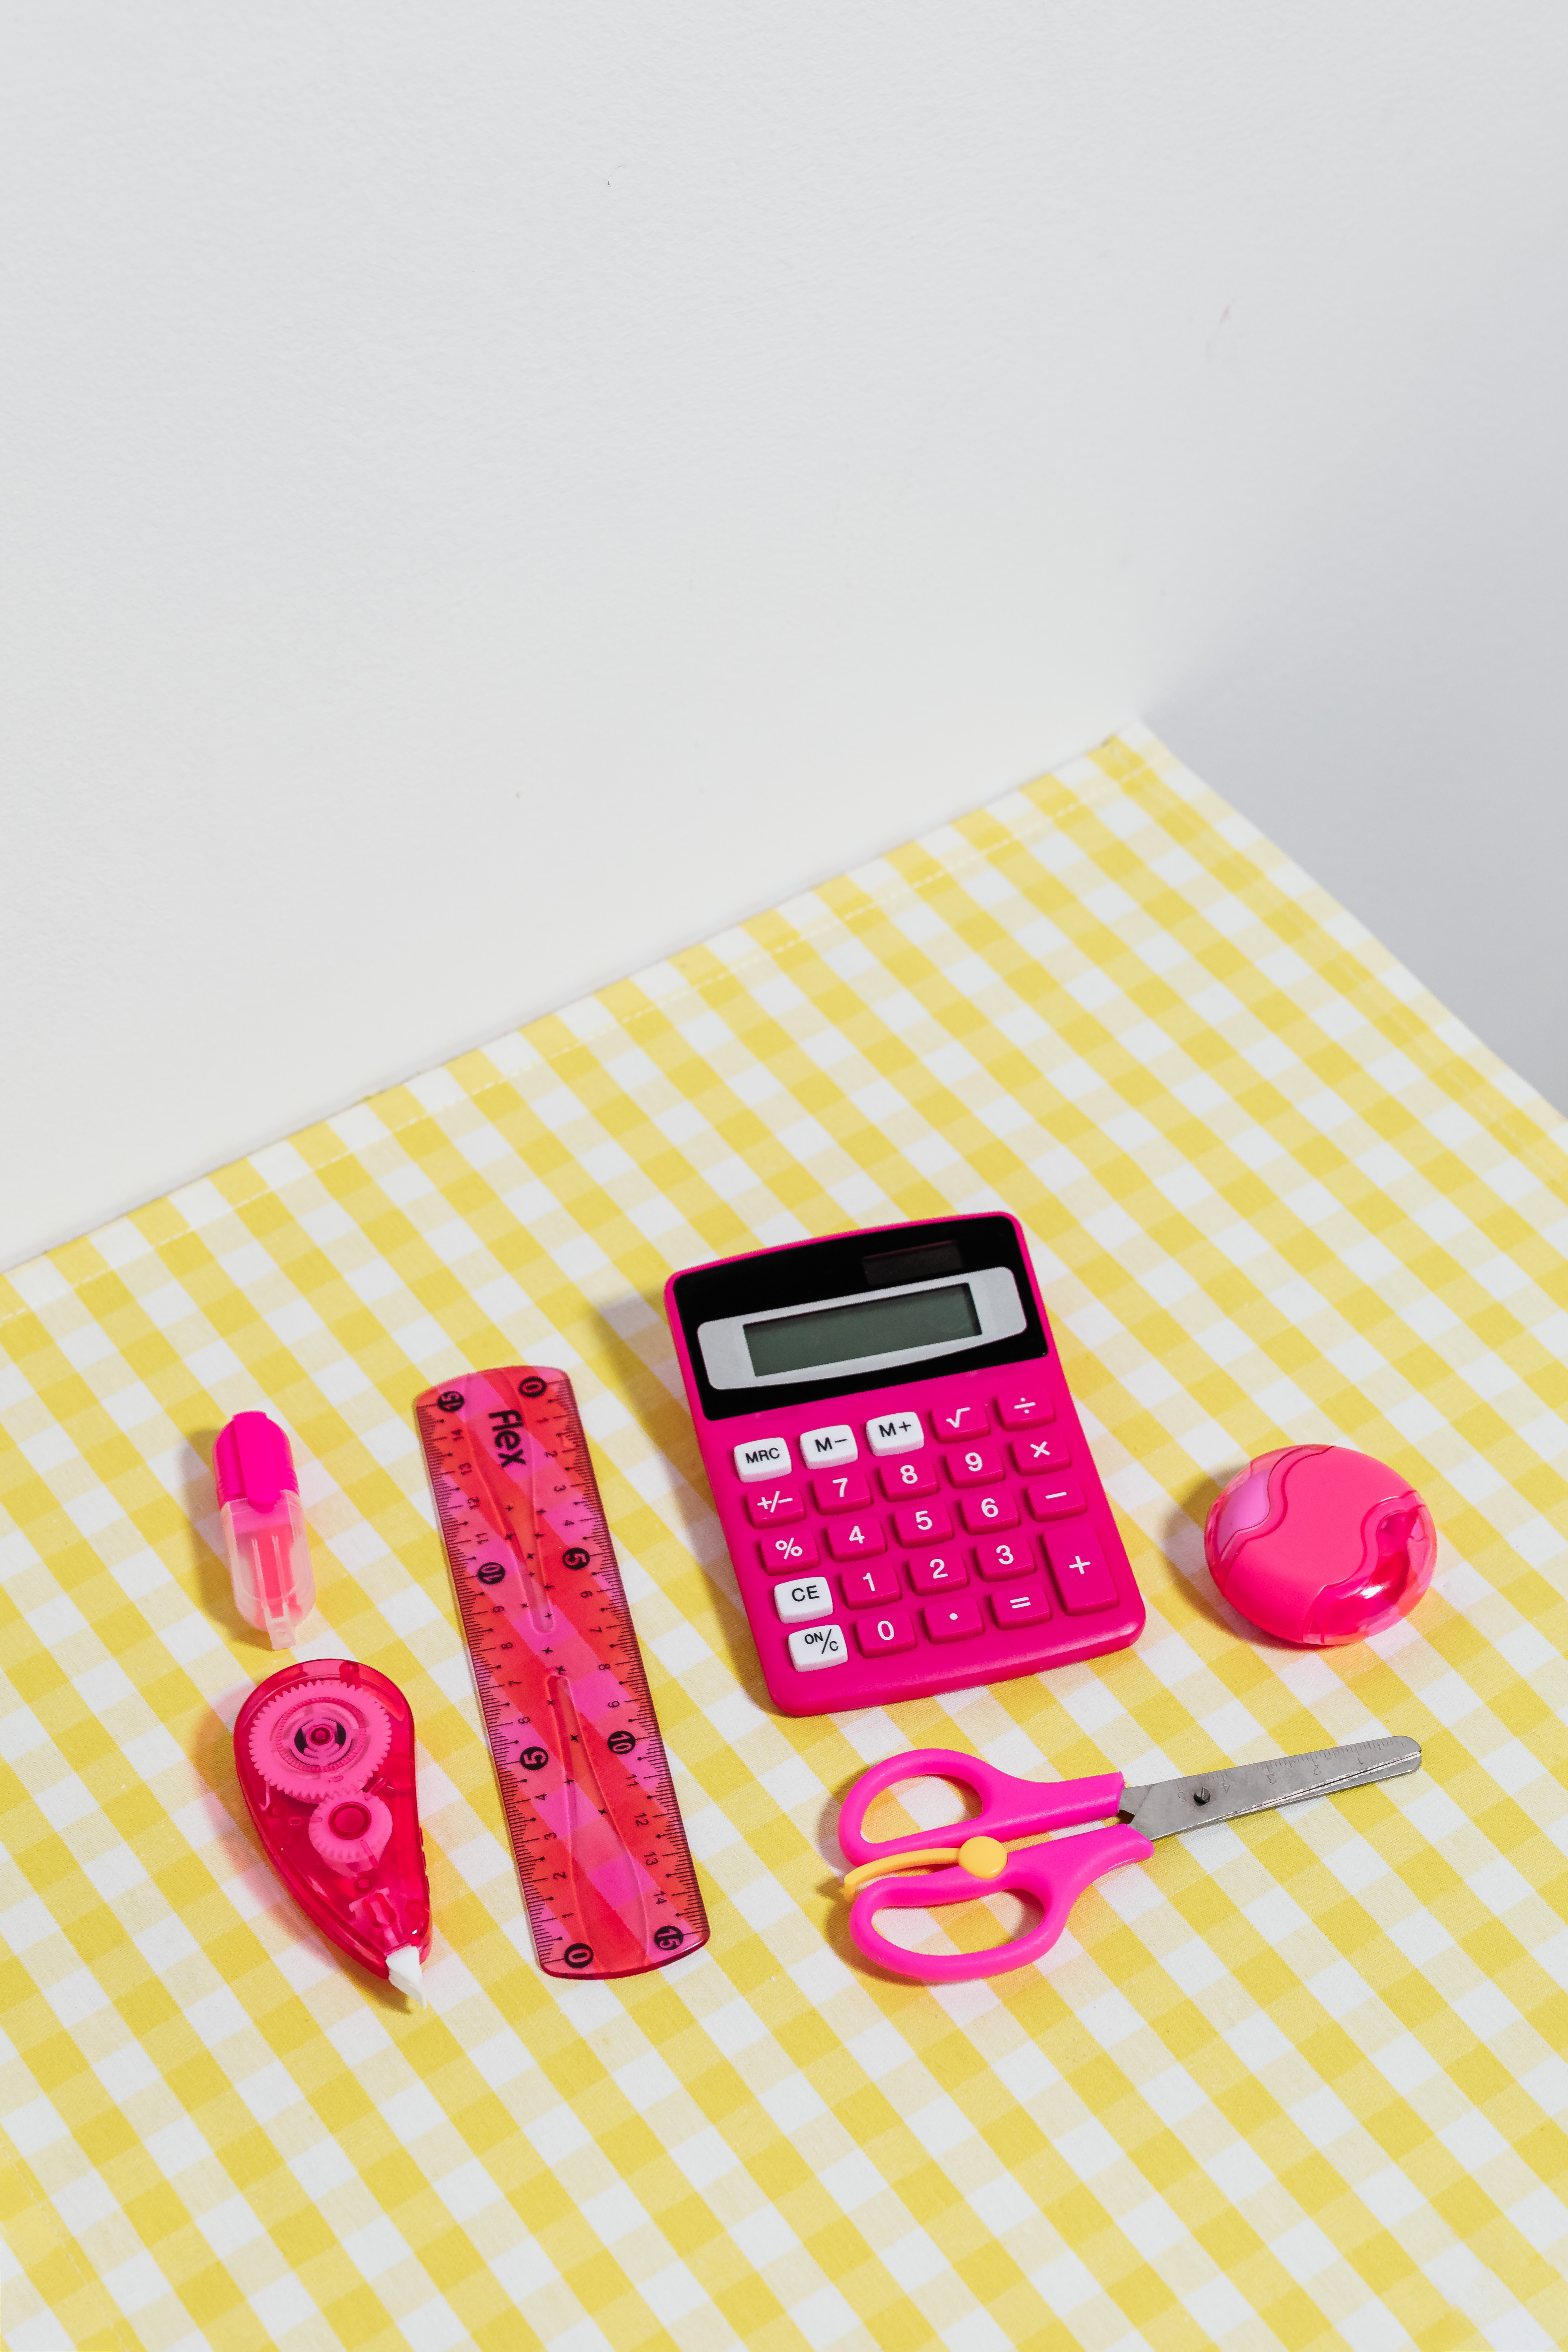 School accessories at abstract background